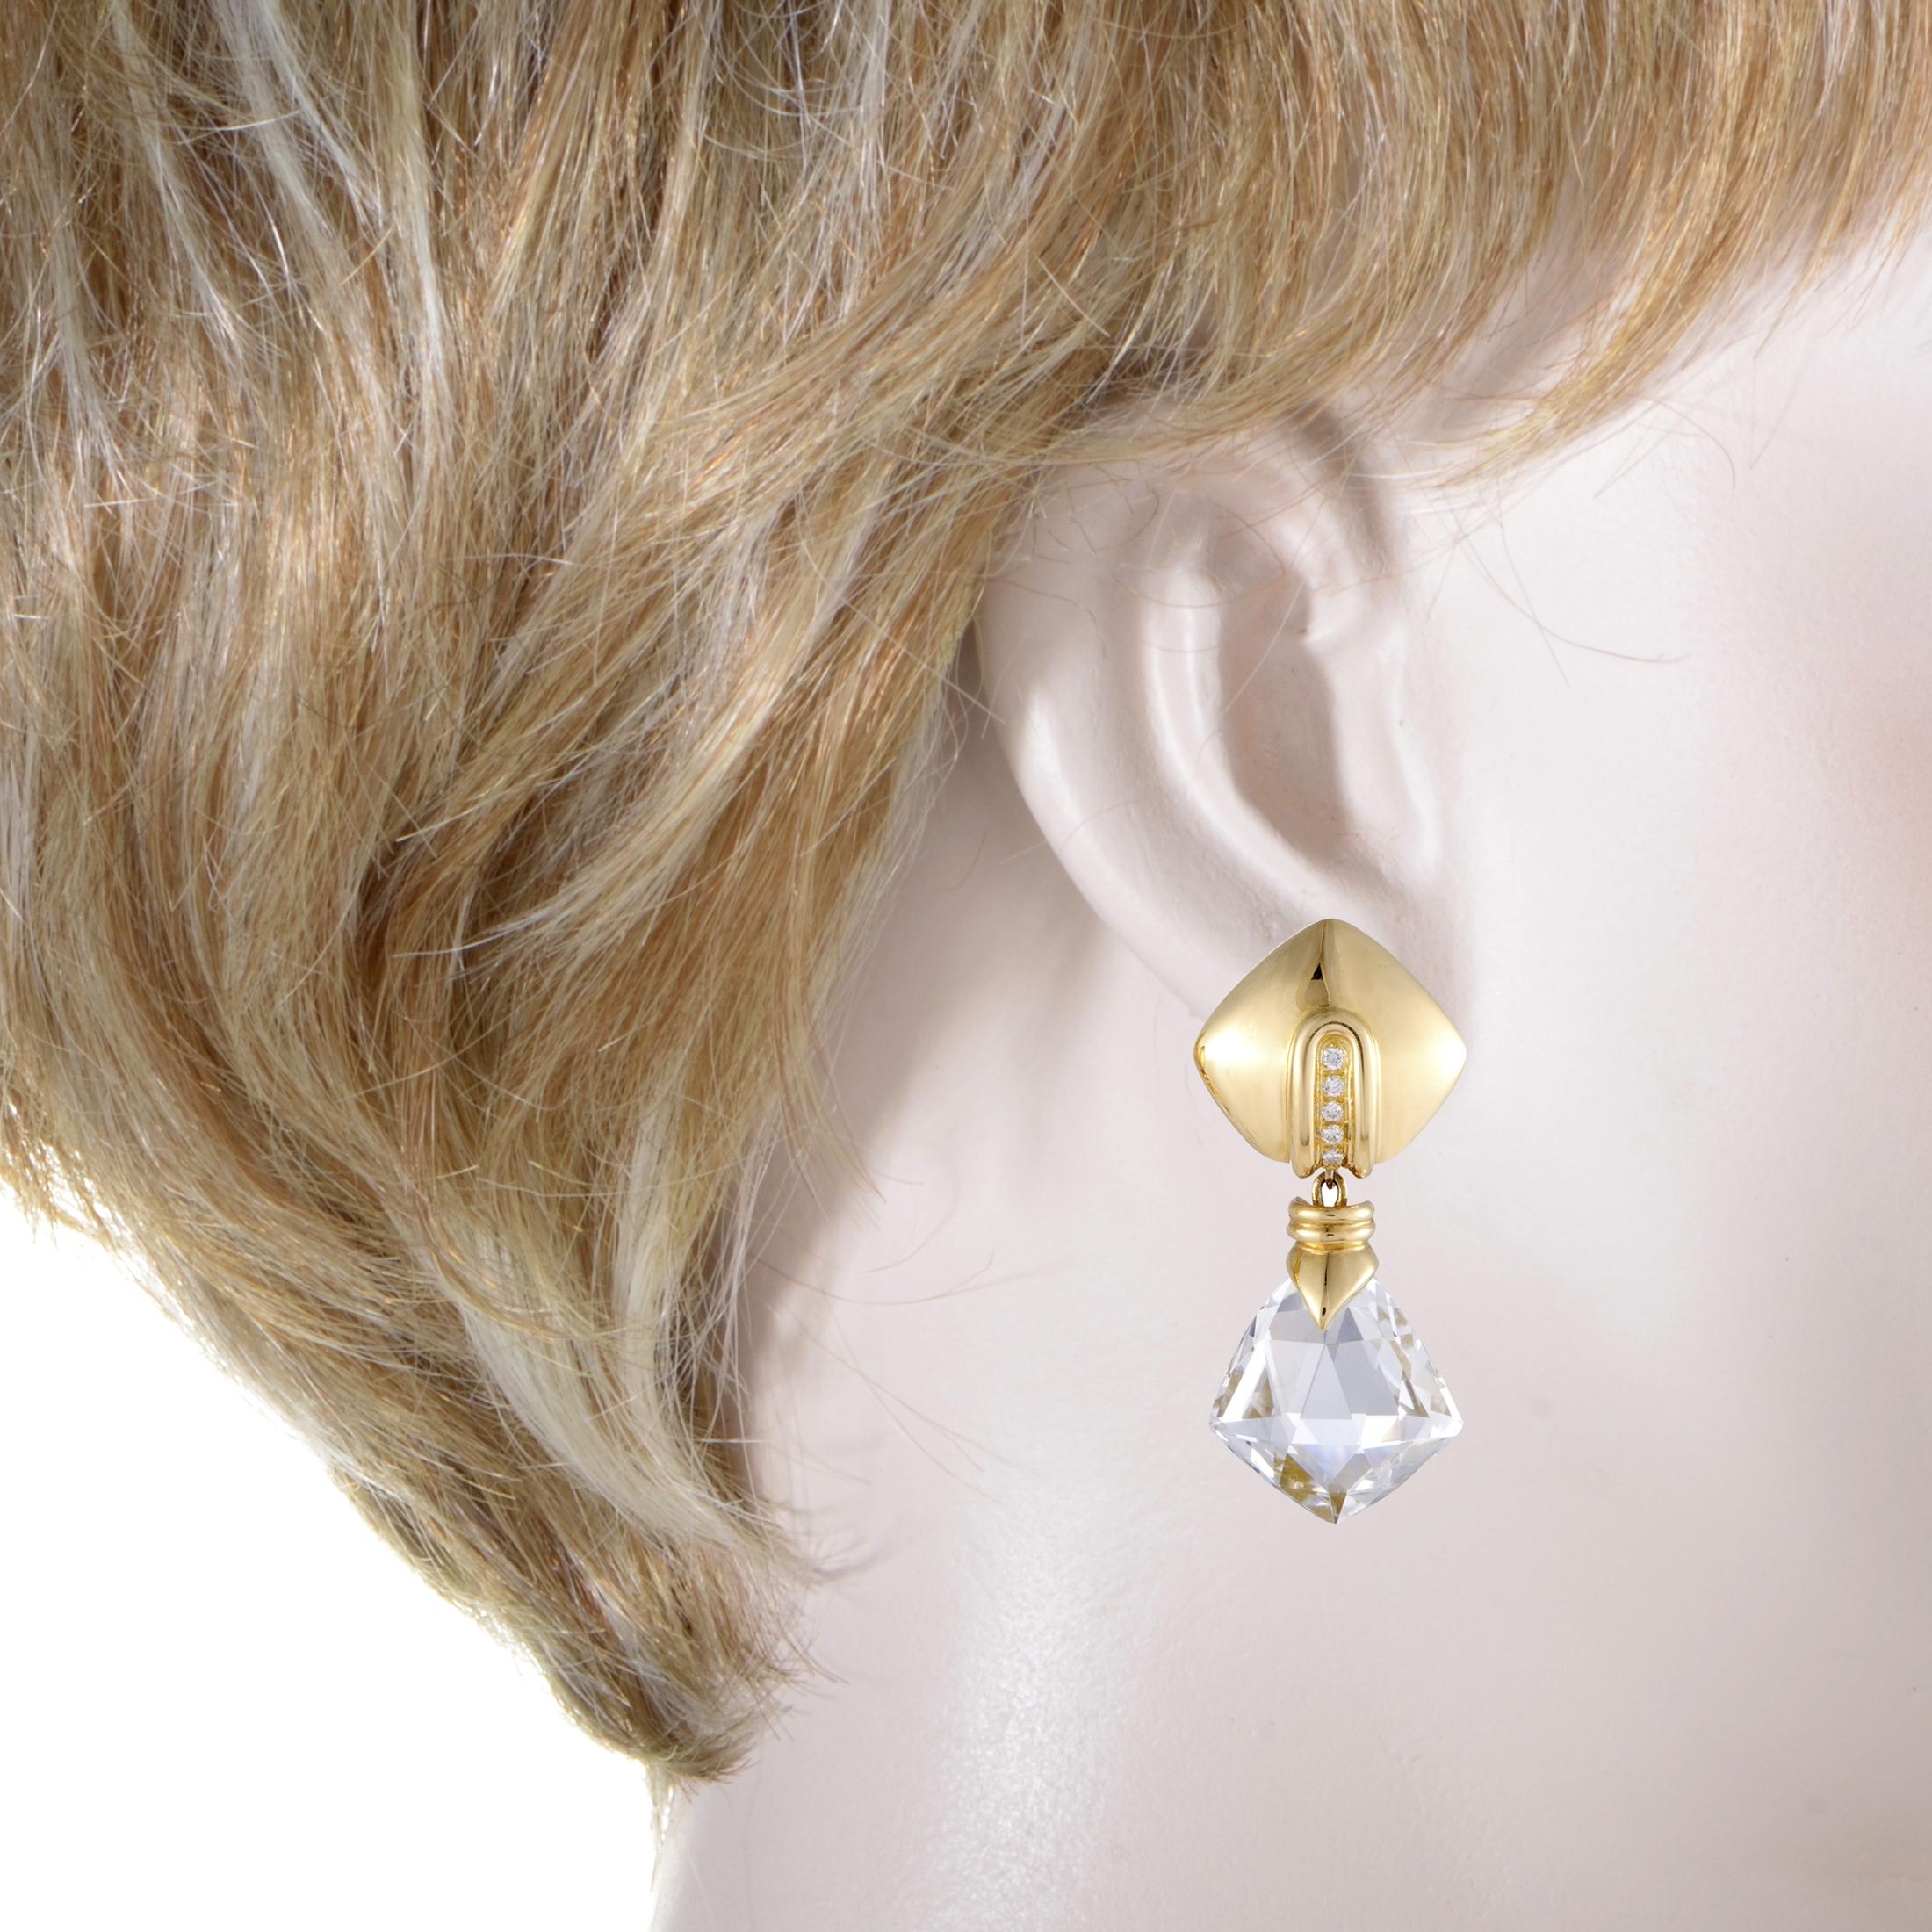 These gorgeous earrings are designed by Antonini in an exceptionally classy manner and offer a splendidly elegant appearance. The earrings are crafted from 18K yellow gold and decorated with white topaz stones and with scintillating diamonds that